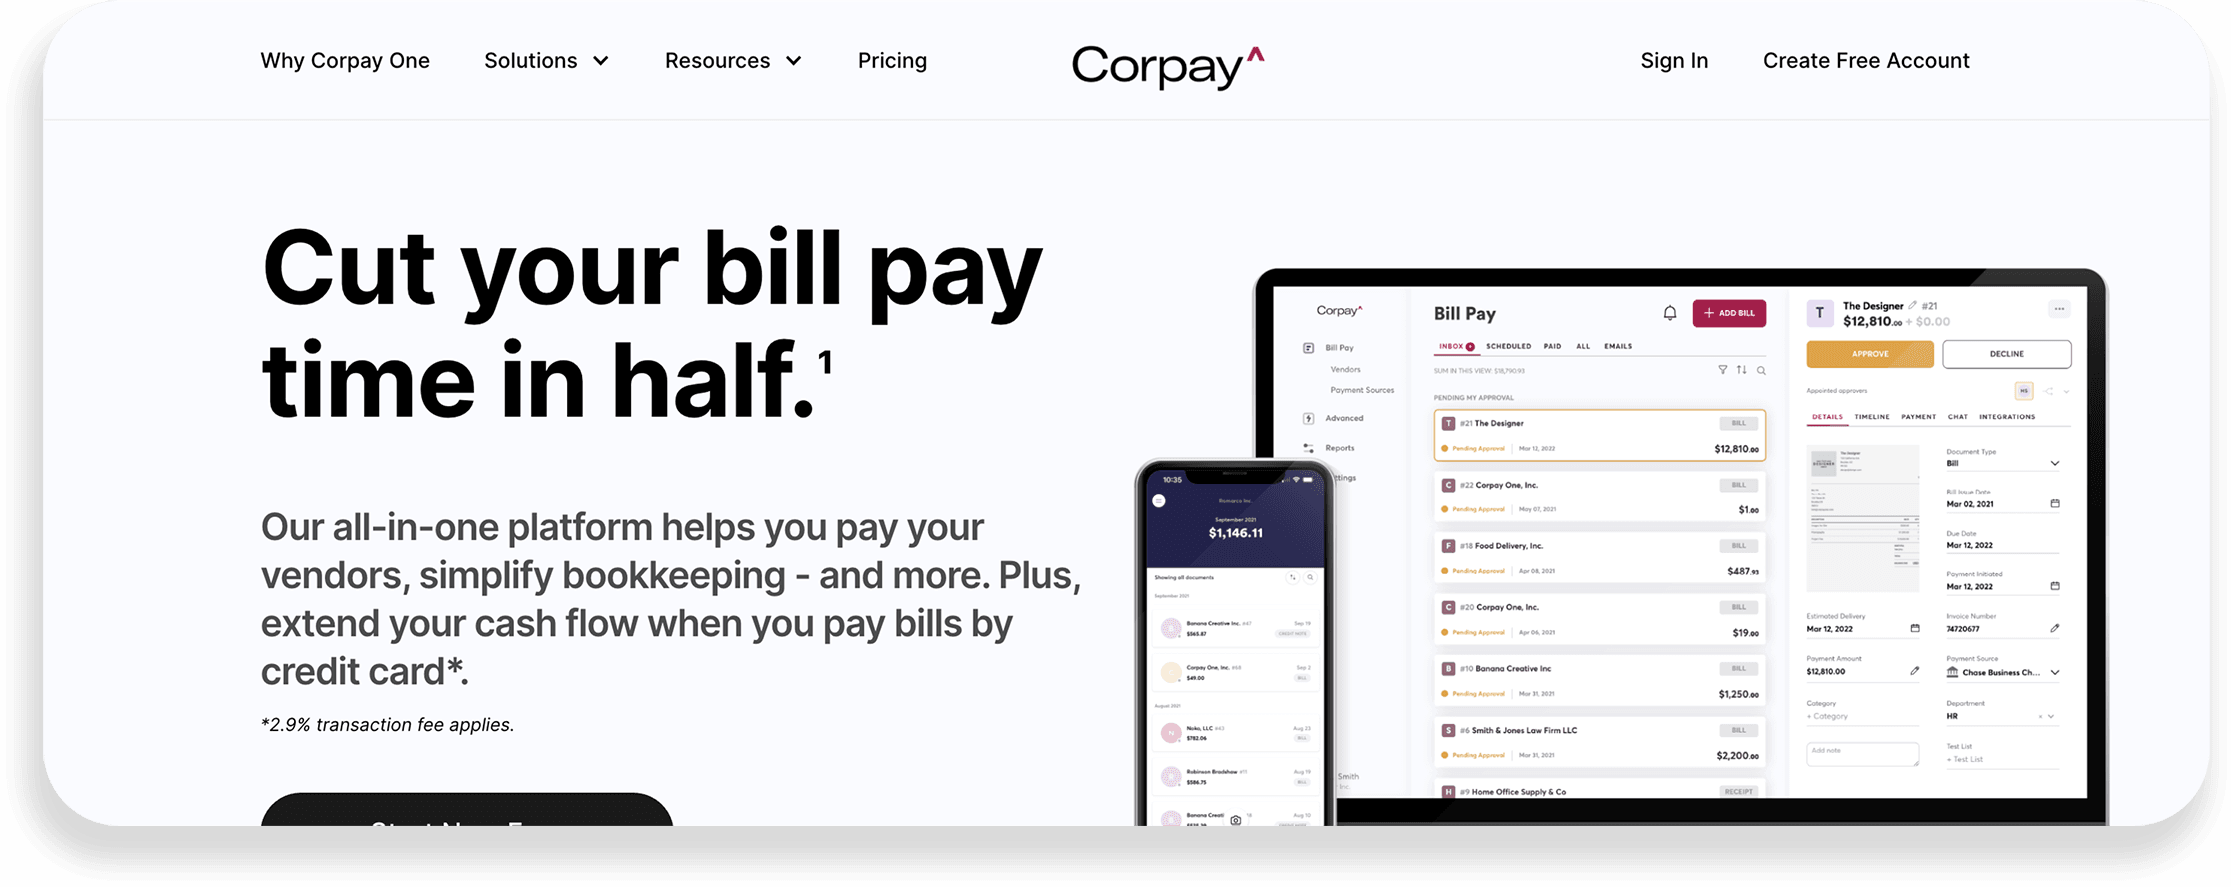 Corpay One - Small Business Bill Pay Software All-in-one